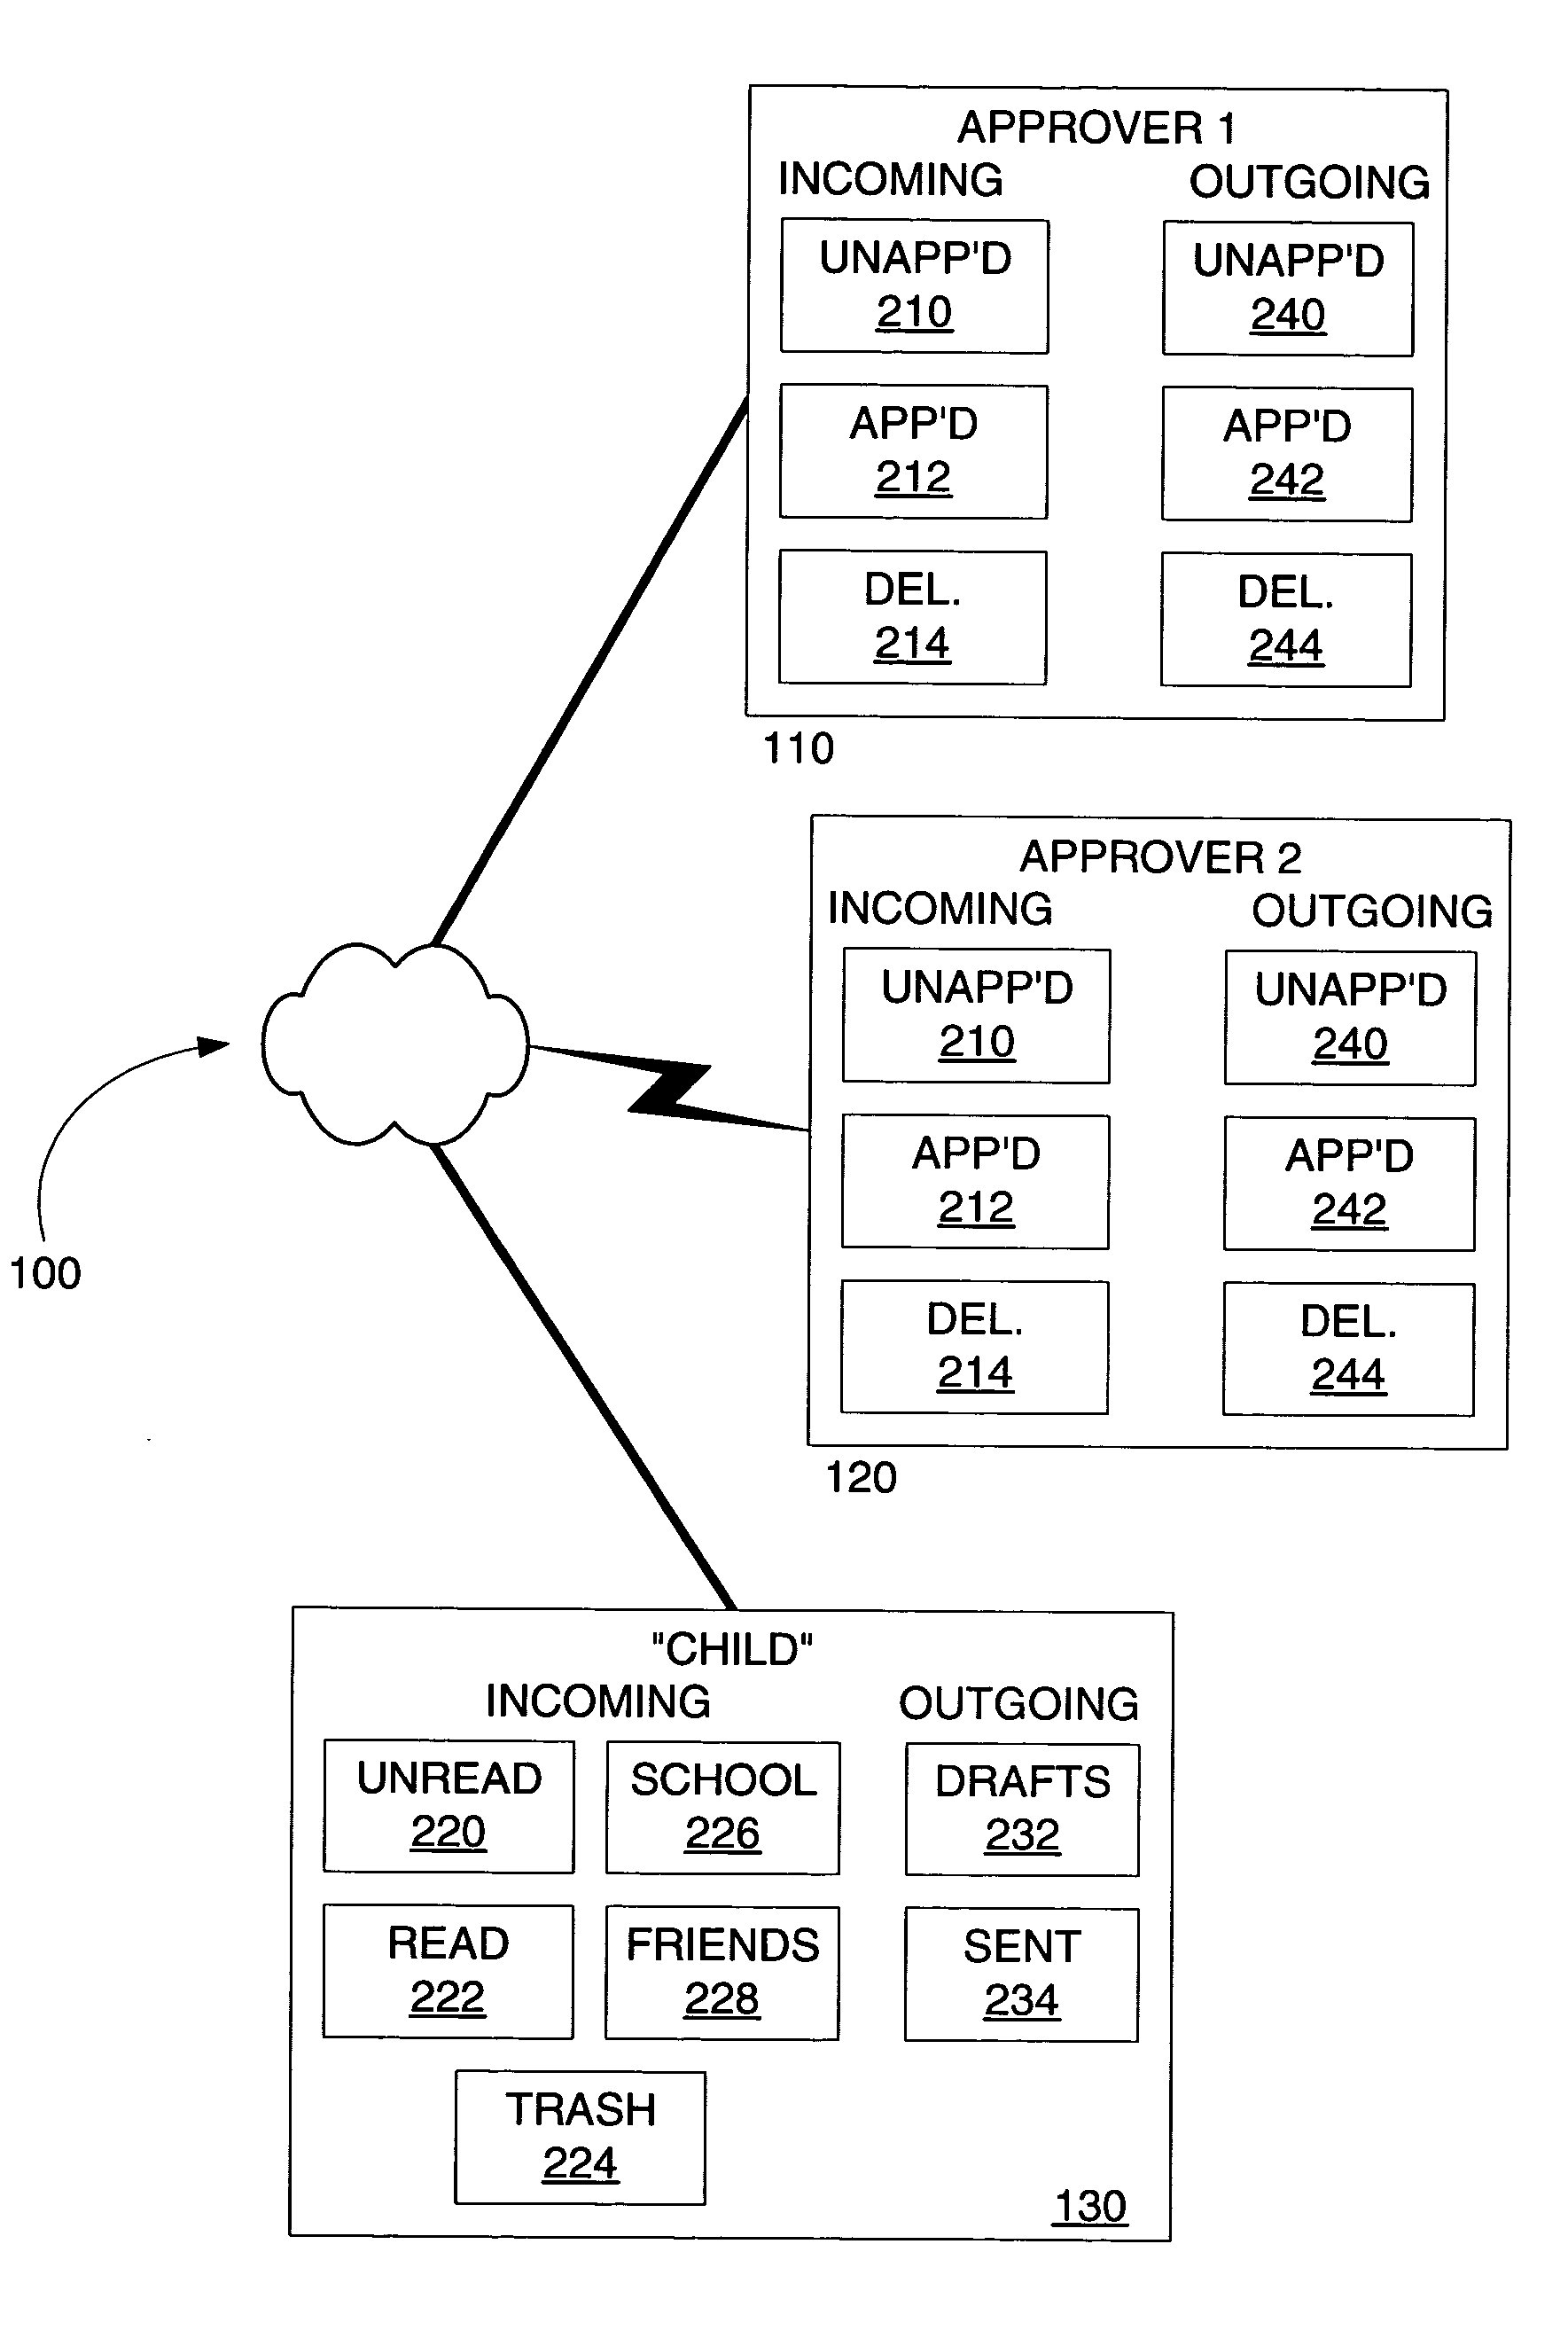 Electronic mail control system